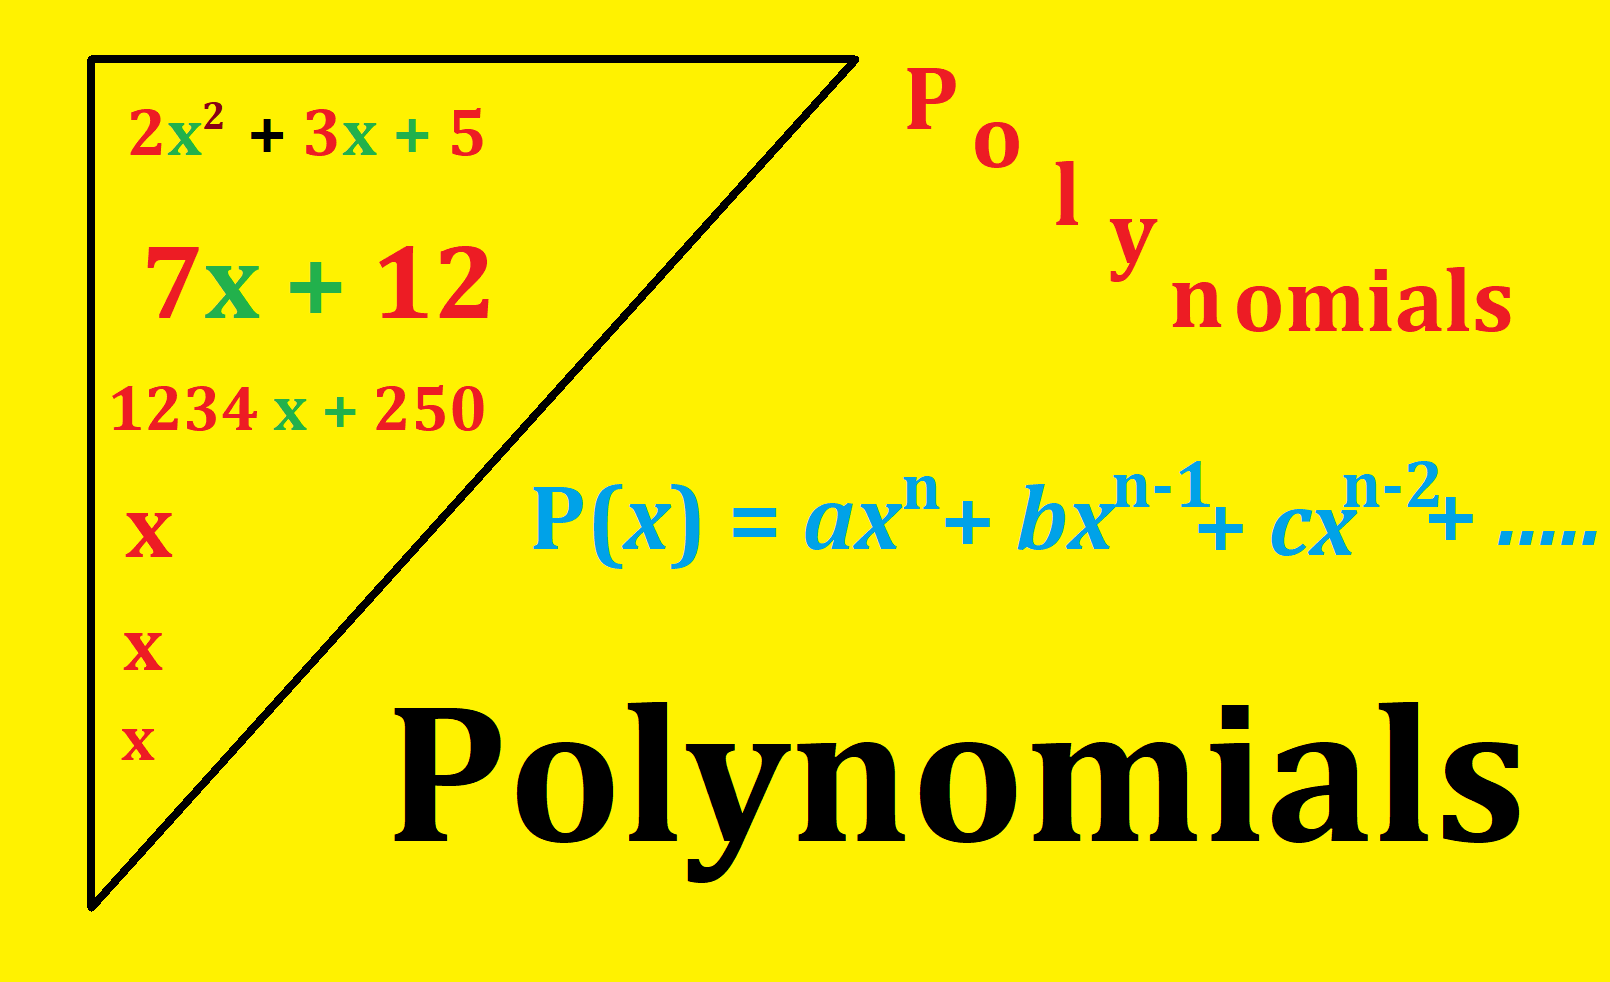 What are Polynomials